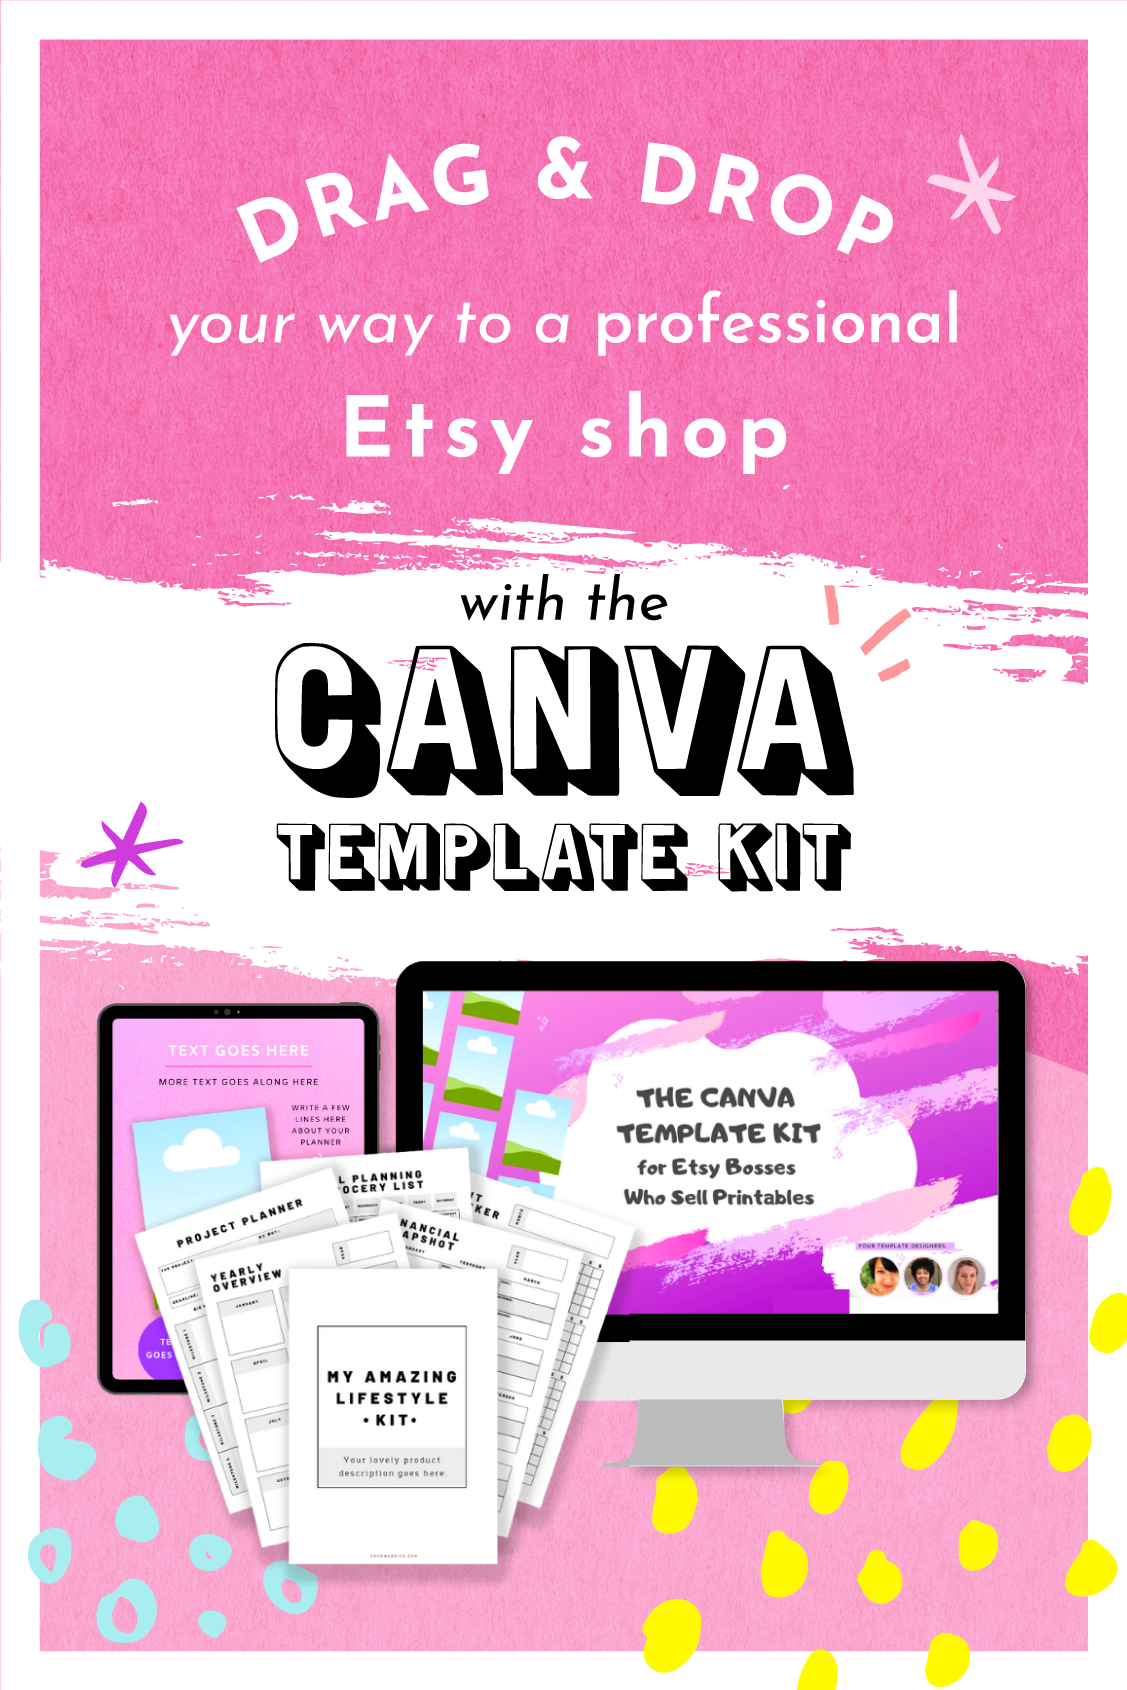 The Canva Template Kit